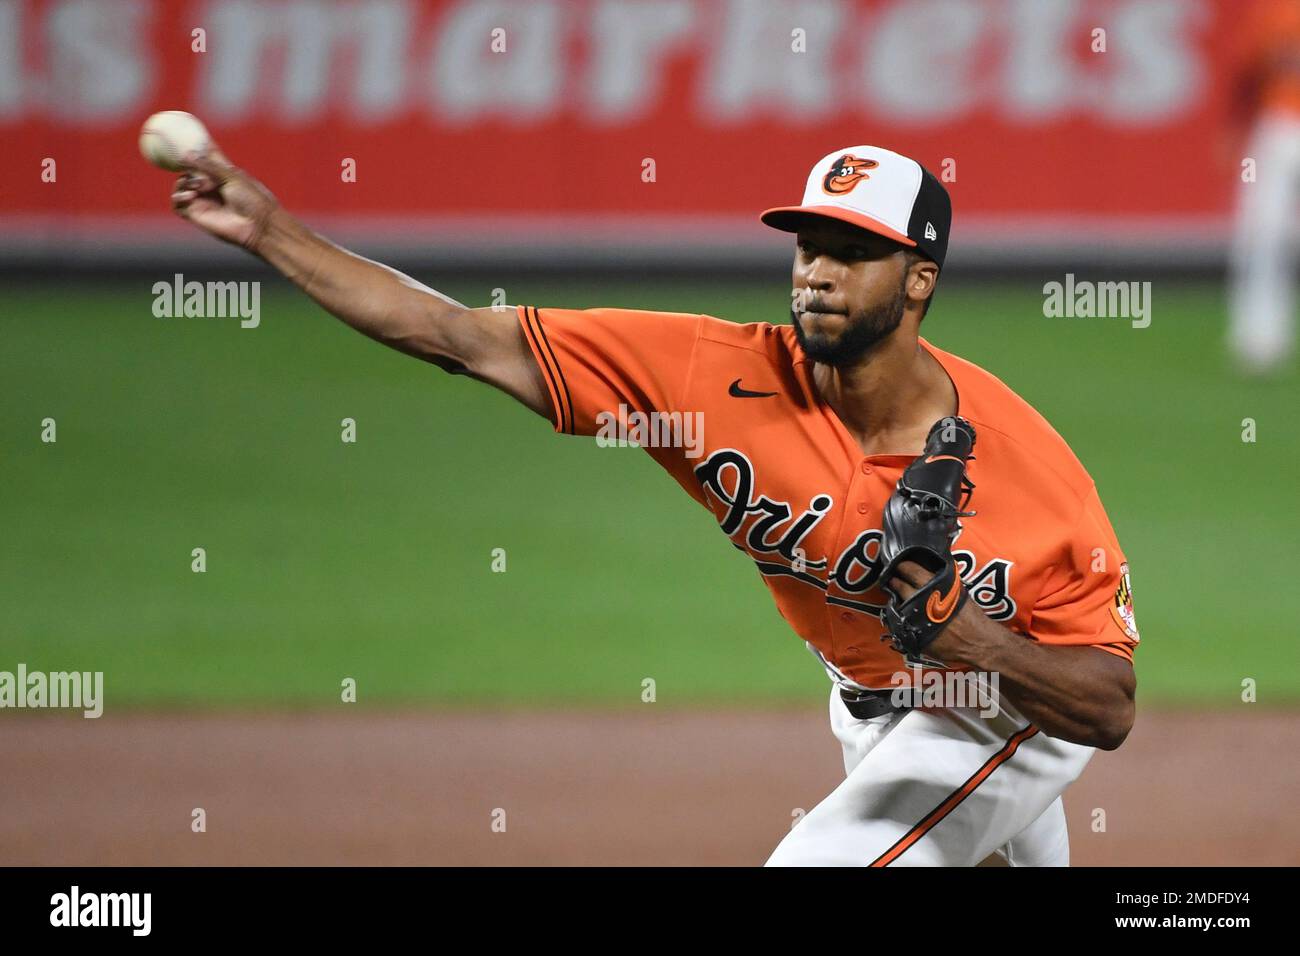 Baltimore Orioles relief pitcher Dillon Tate wears the number 42